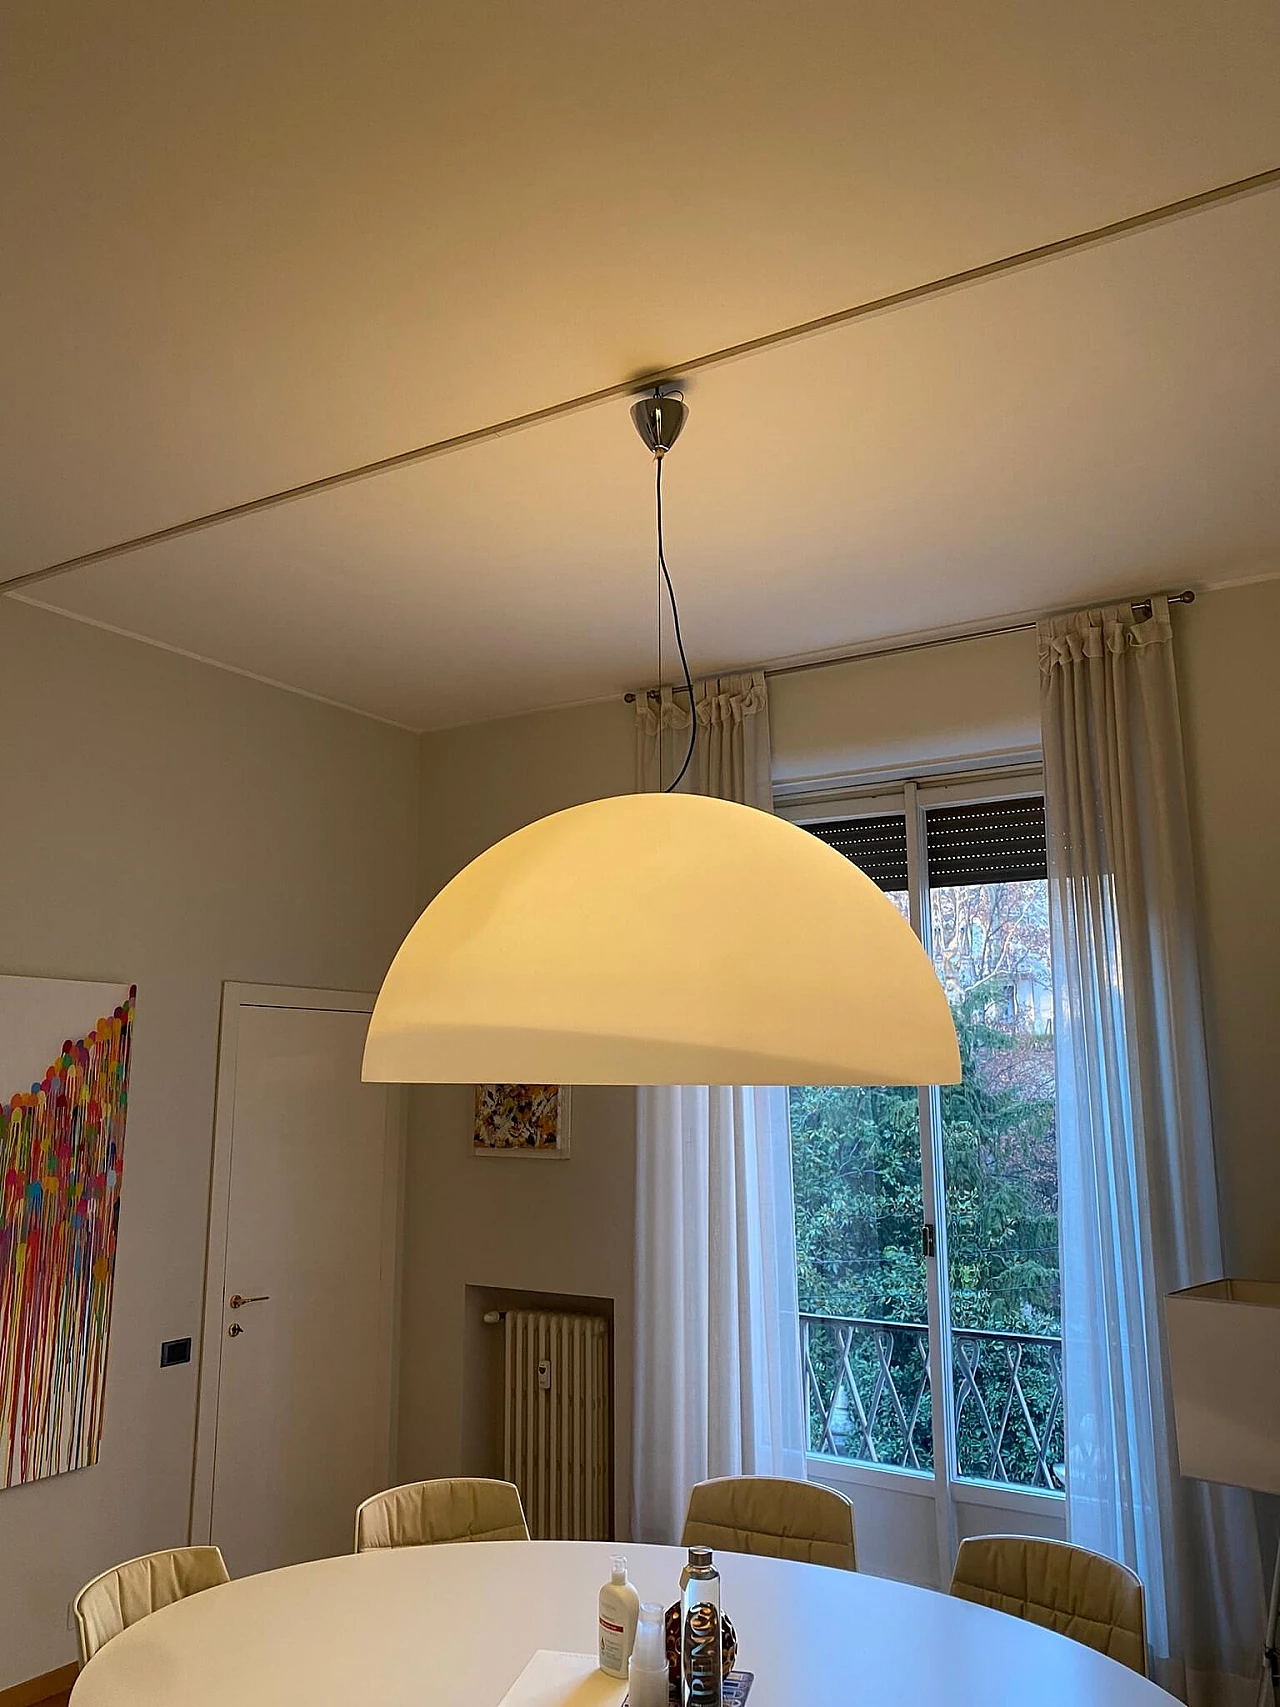 Avico ceiling lamp by Charles Williams for Fontana Arte 1